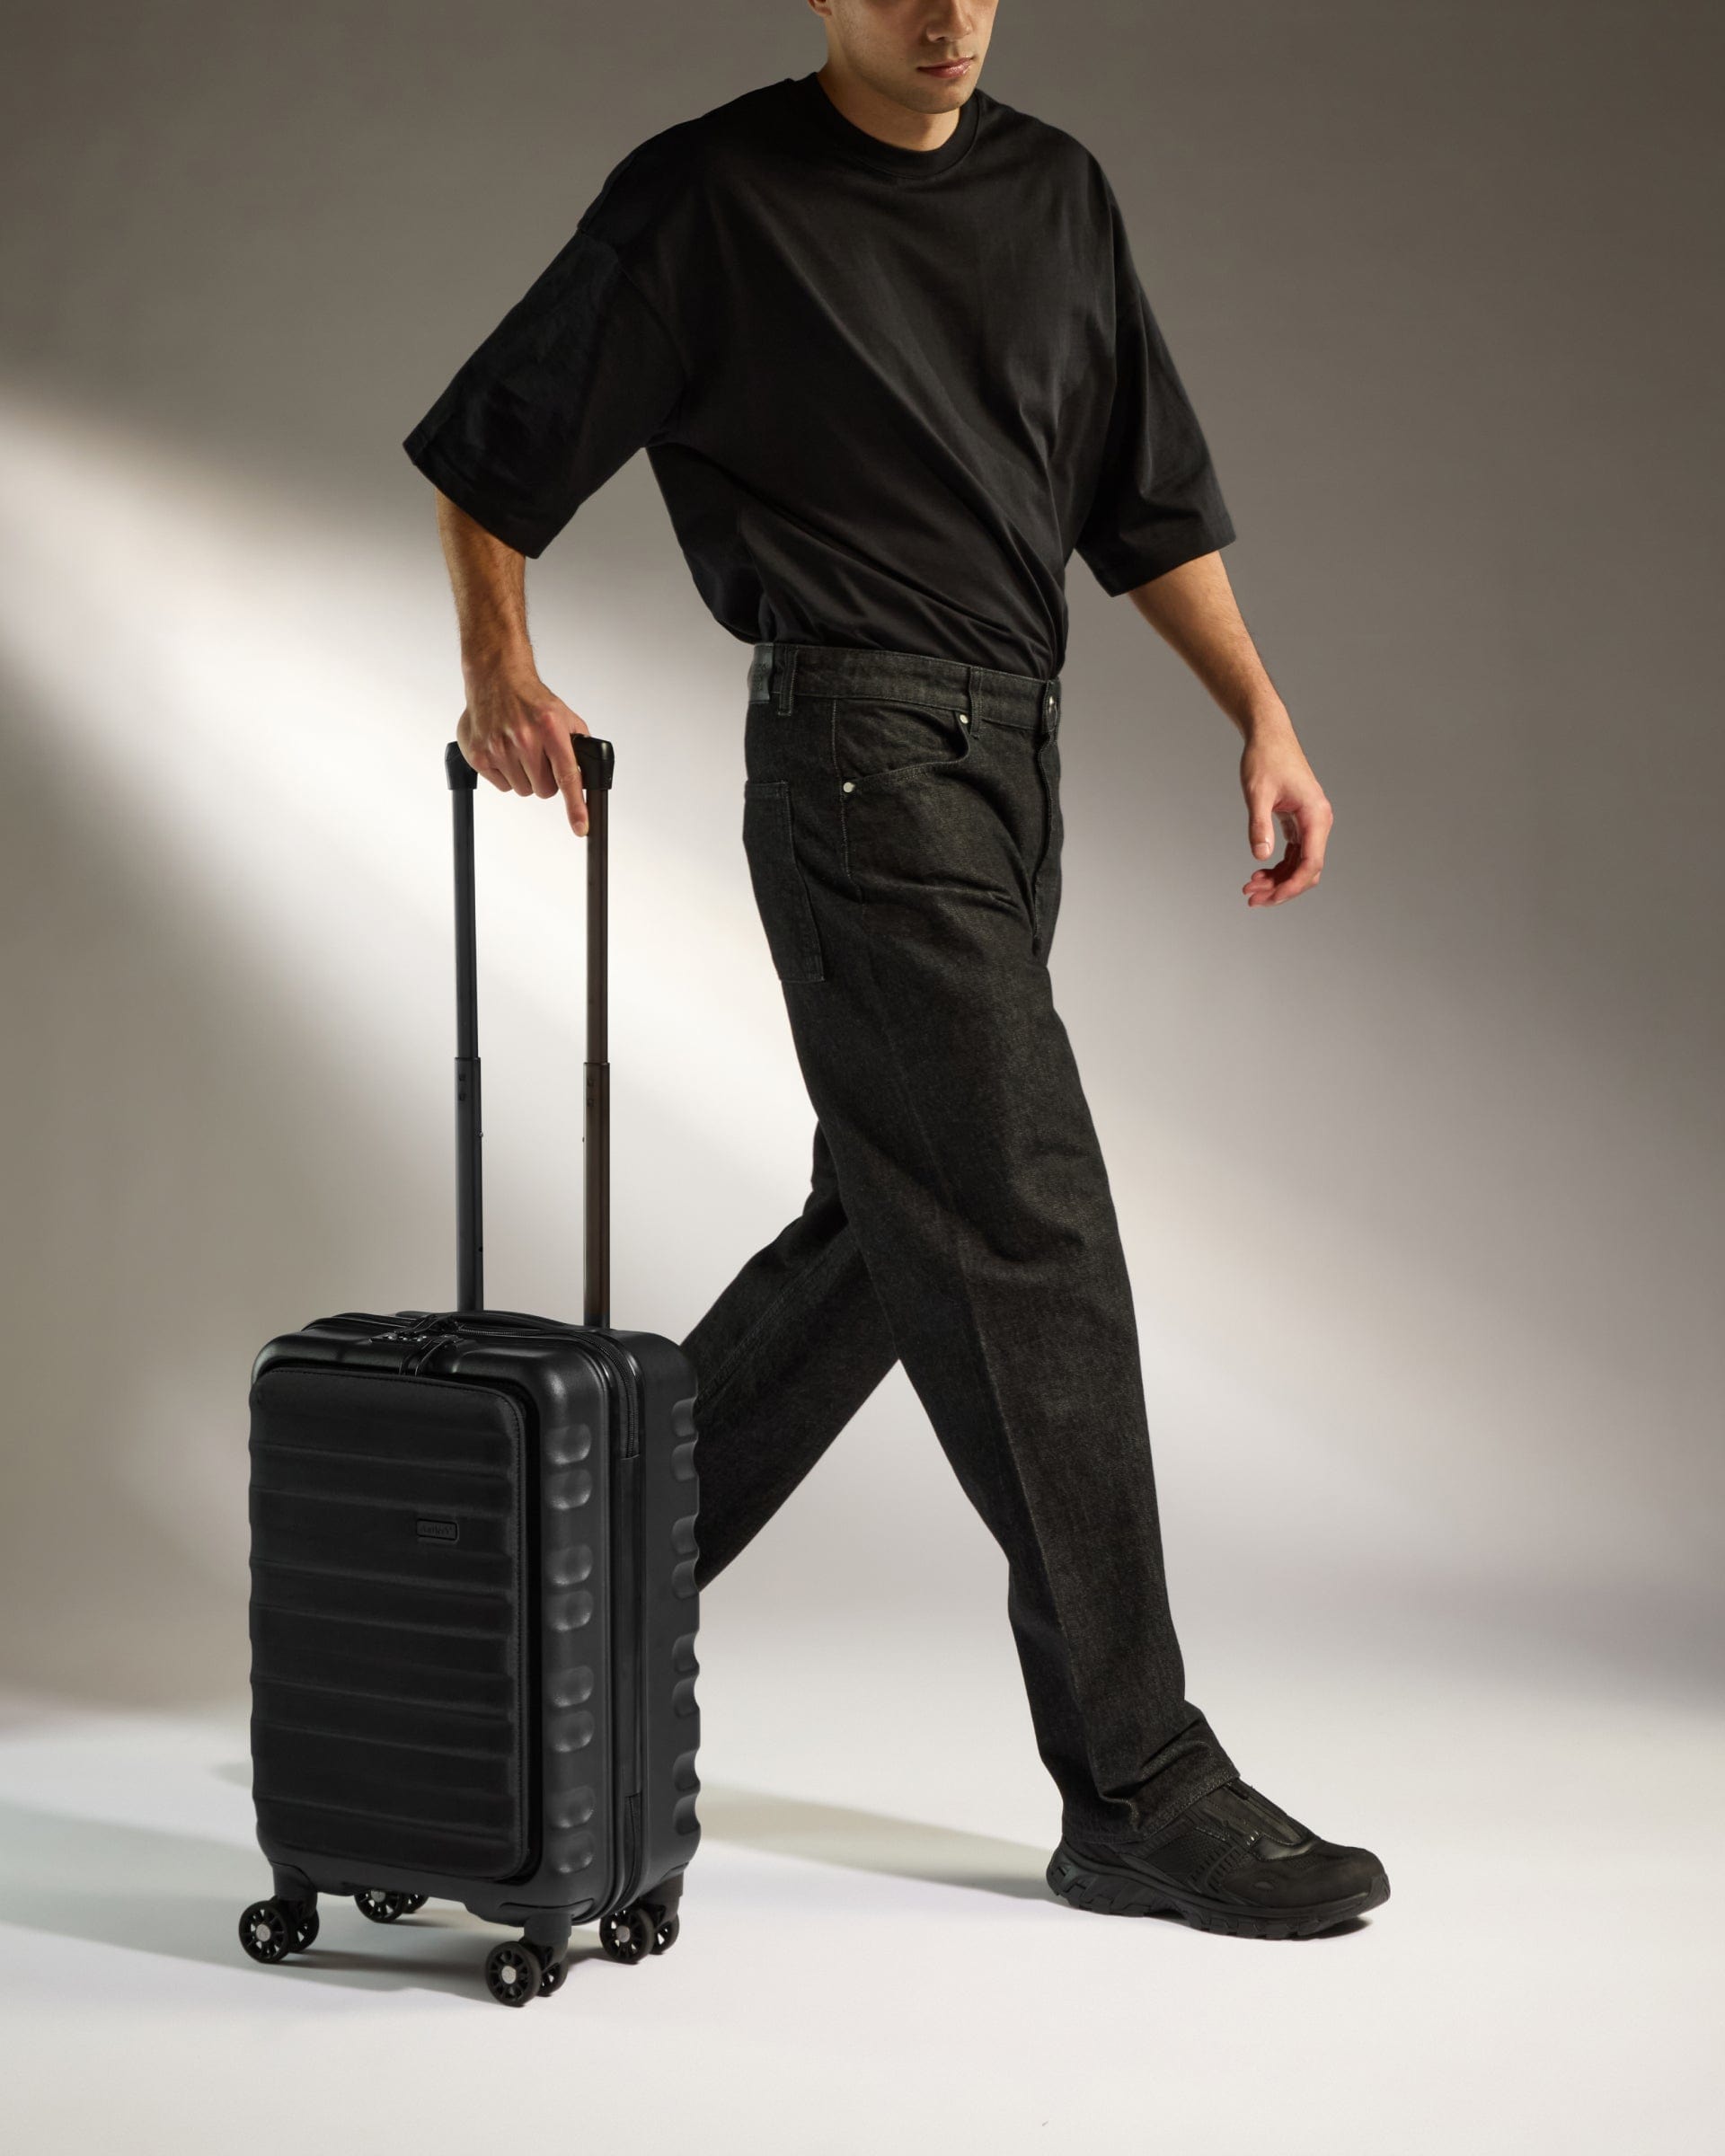 Antler Luggage -  Clifton cabin with pocket in black - Hard Suitcases Clifton Cabin Pocket Suitcase Black | Hard Suitcase | Antler UK